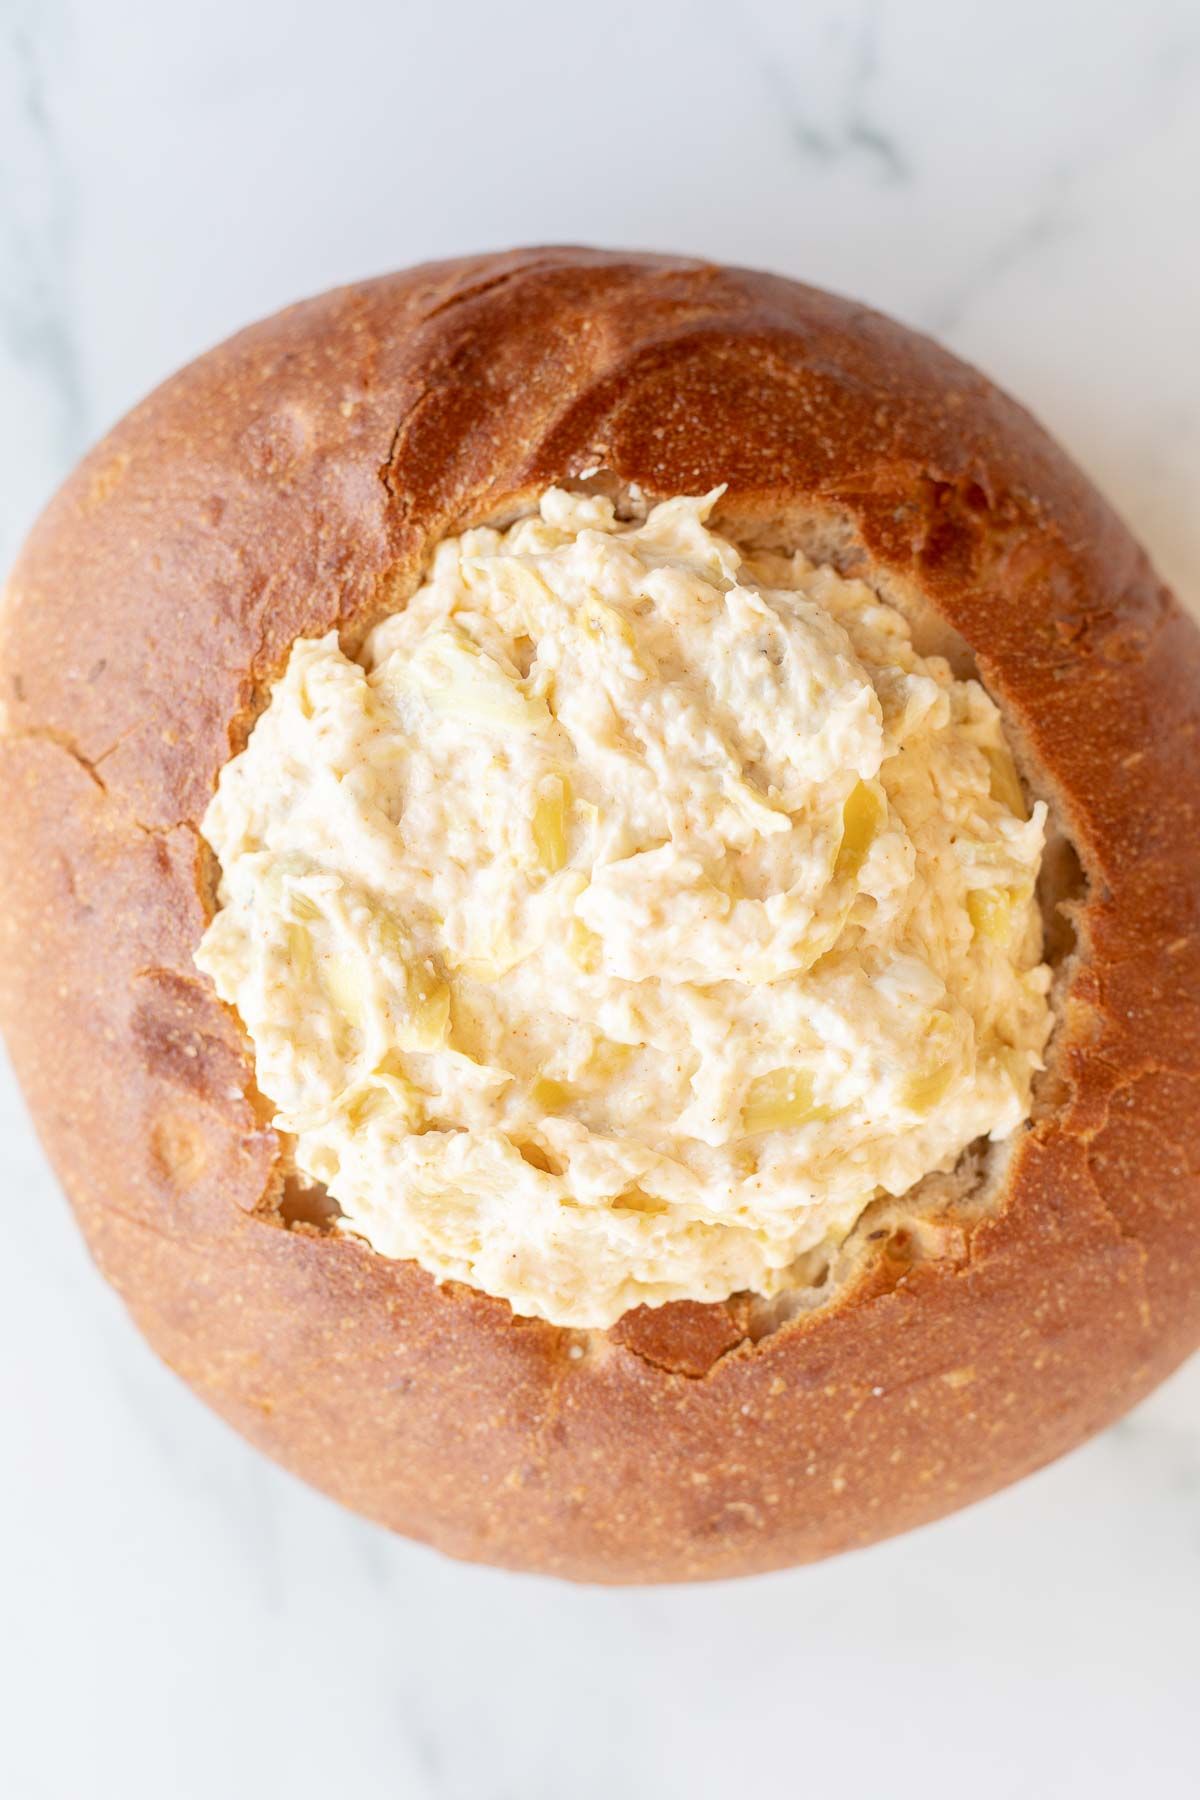 A bread bowl filled with artichoke dip